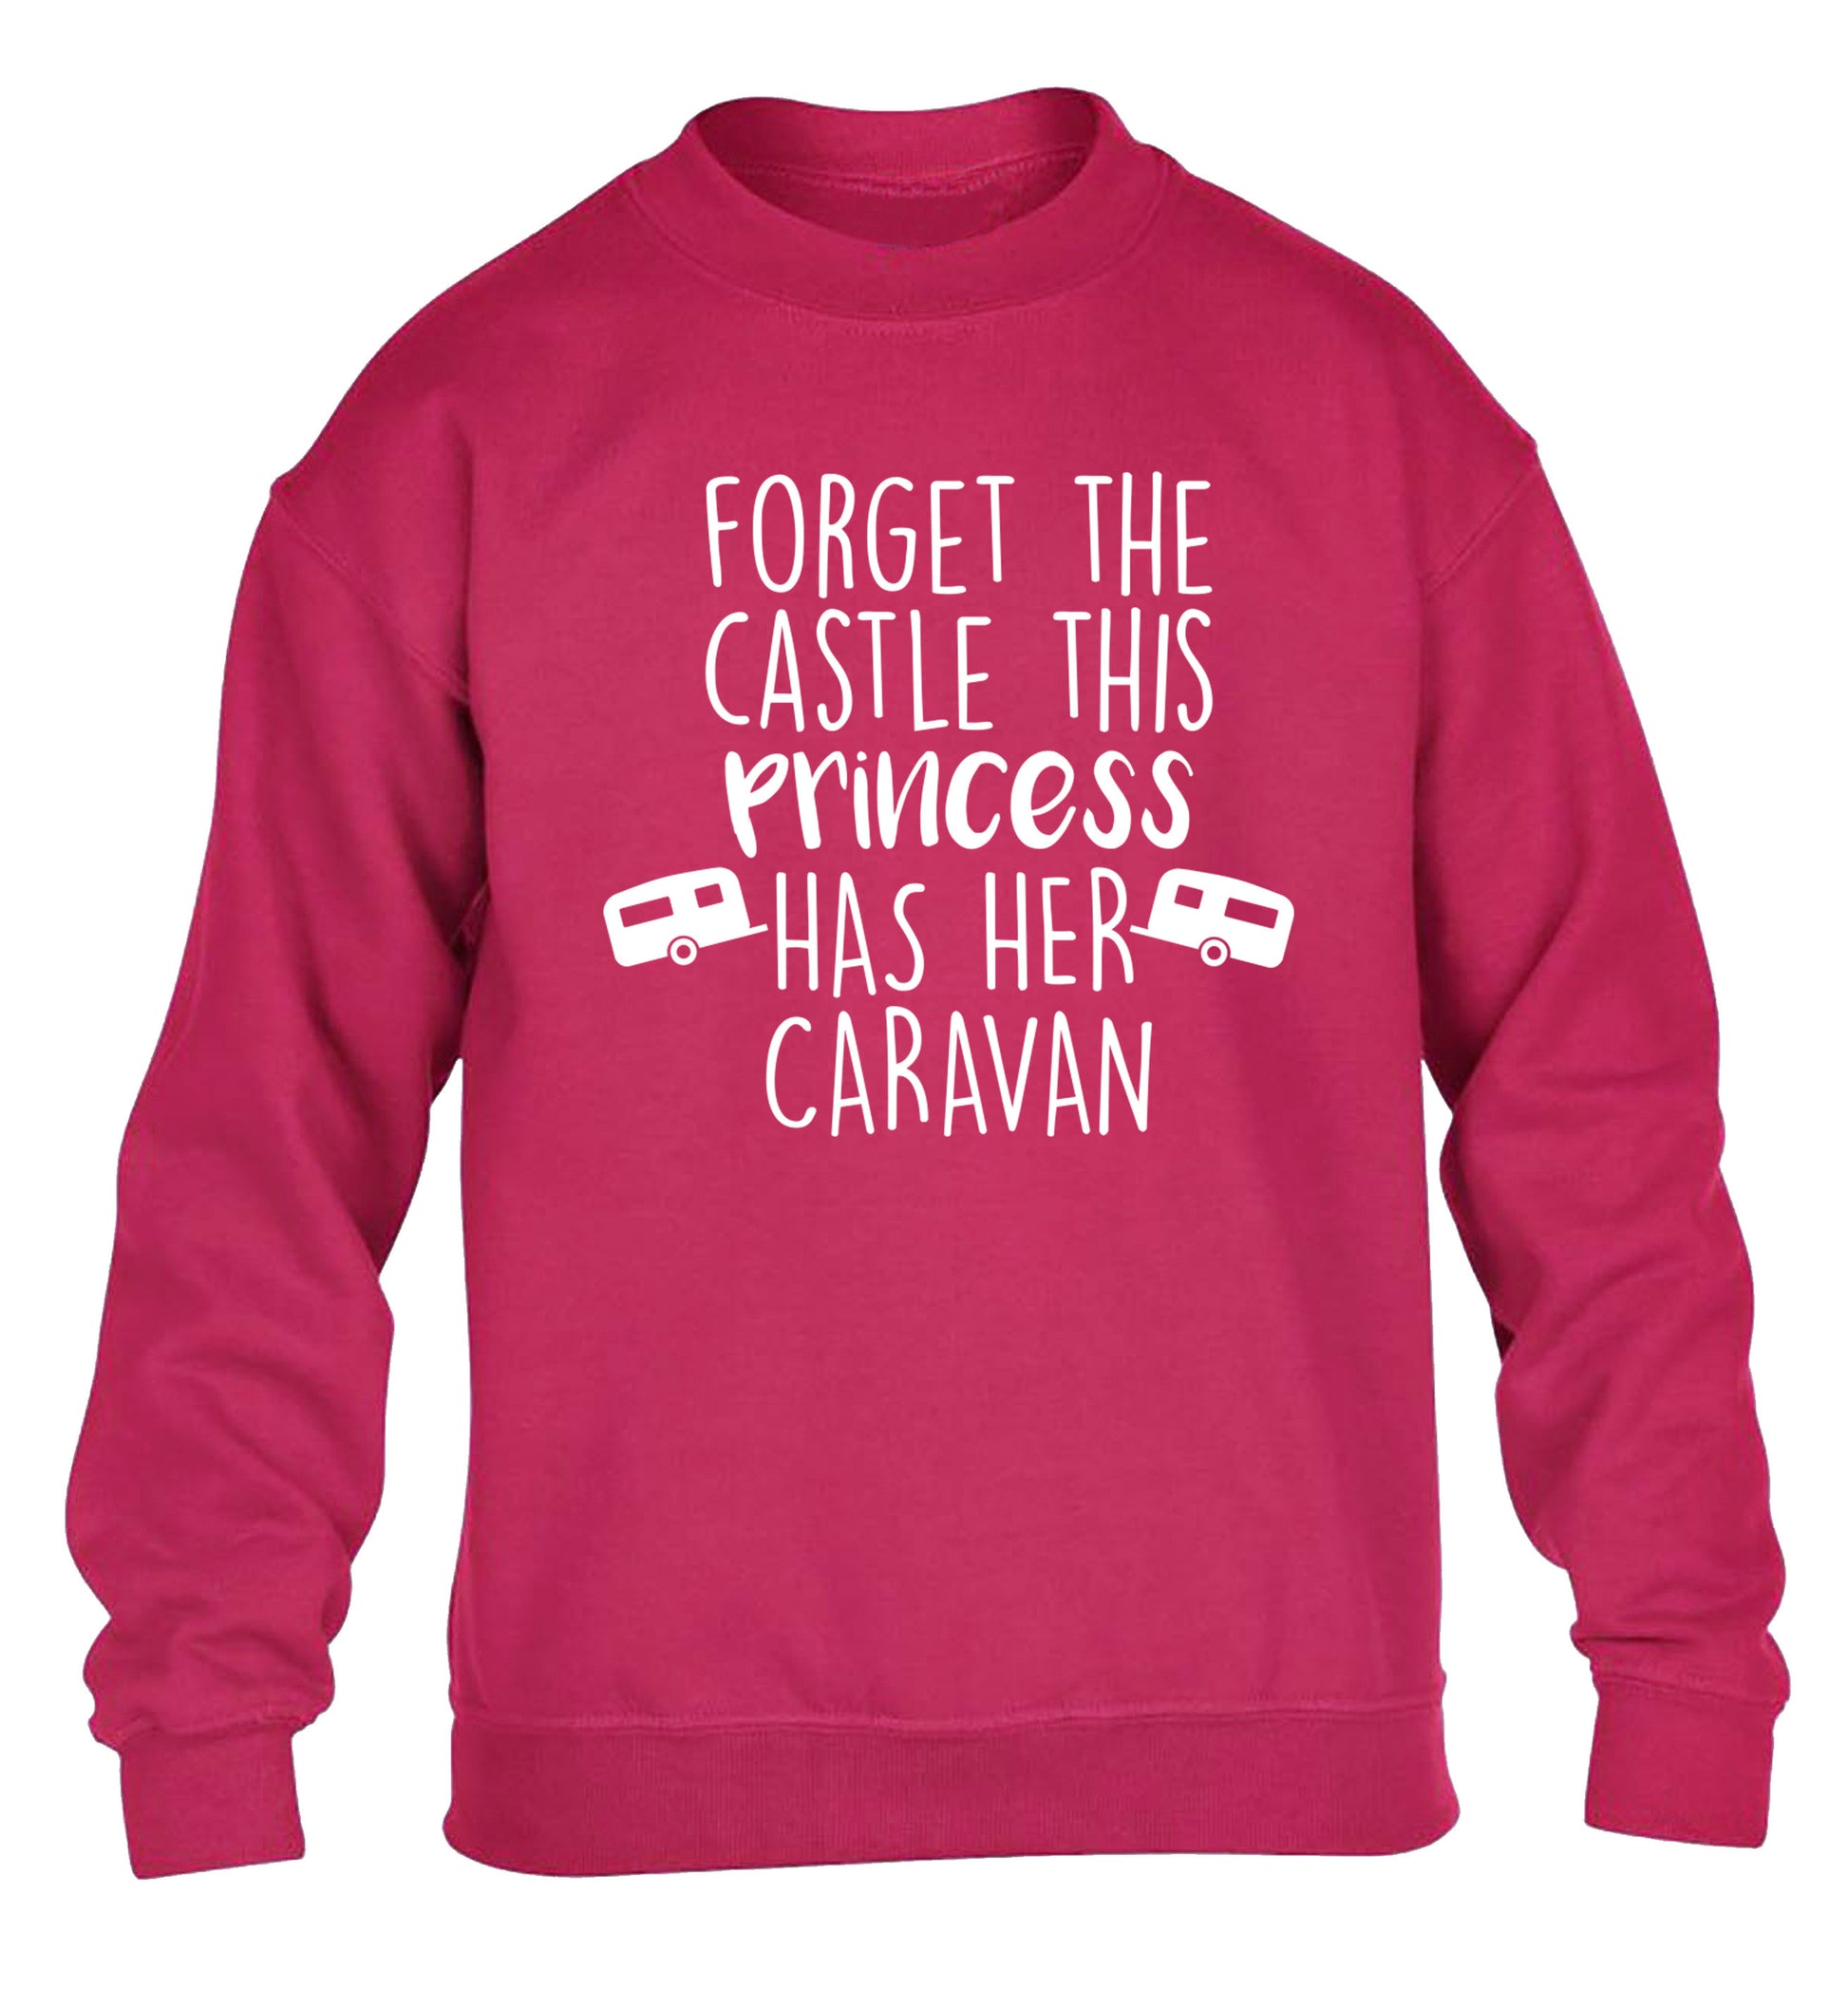 Forget the castle this princess lives at the caravan children's pink sweater 12-14 Years